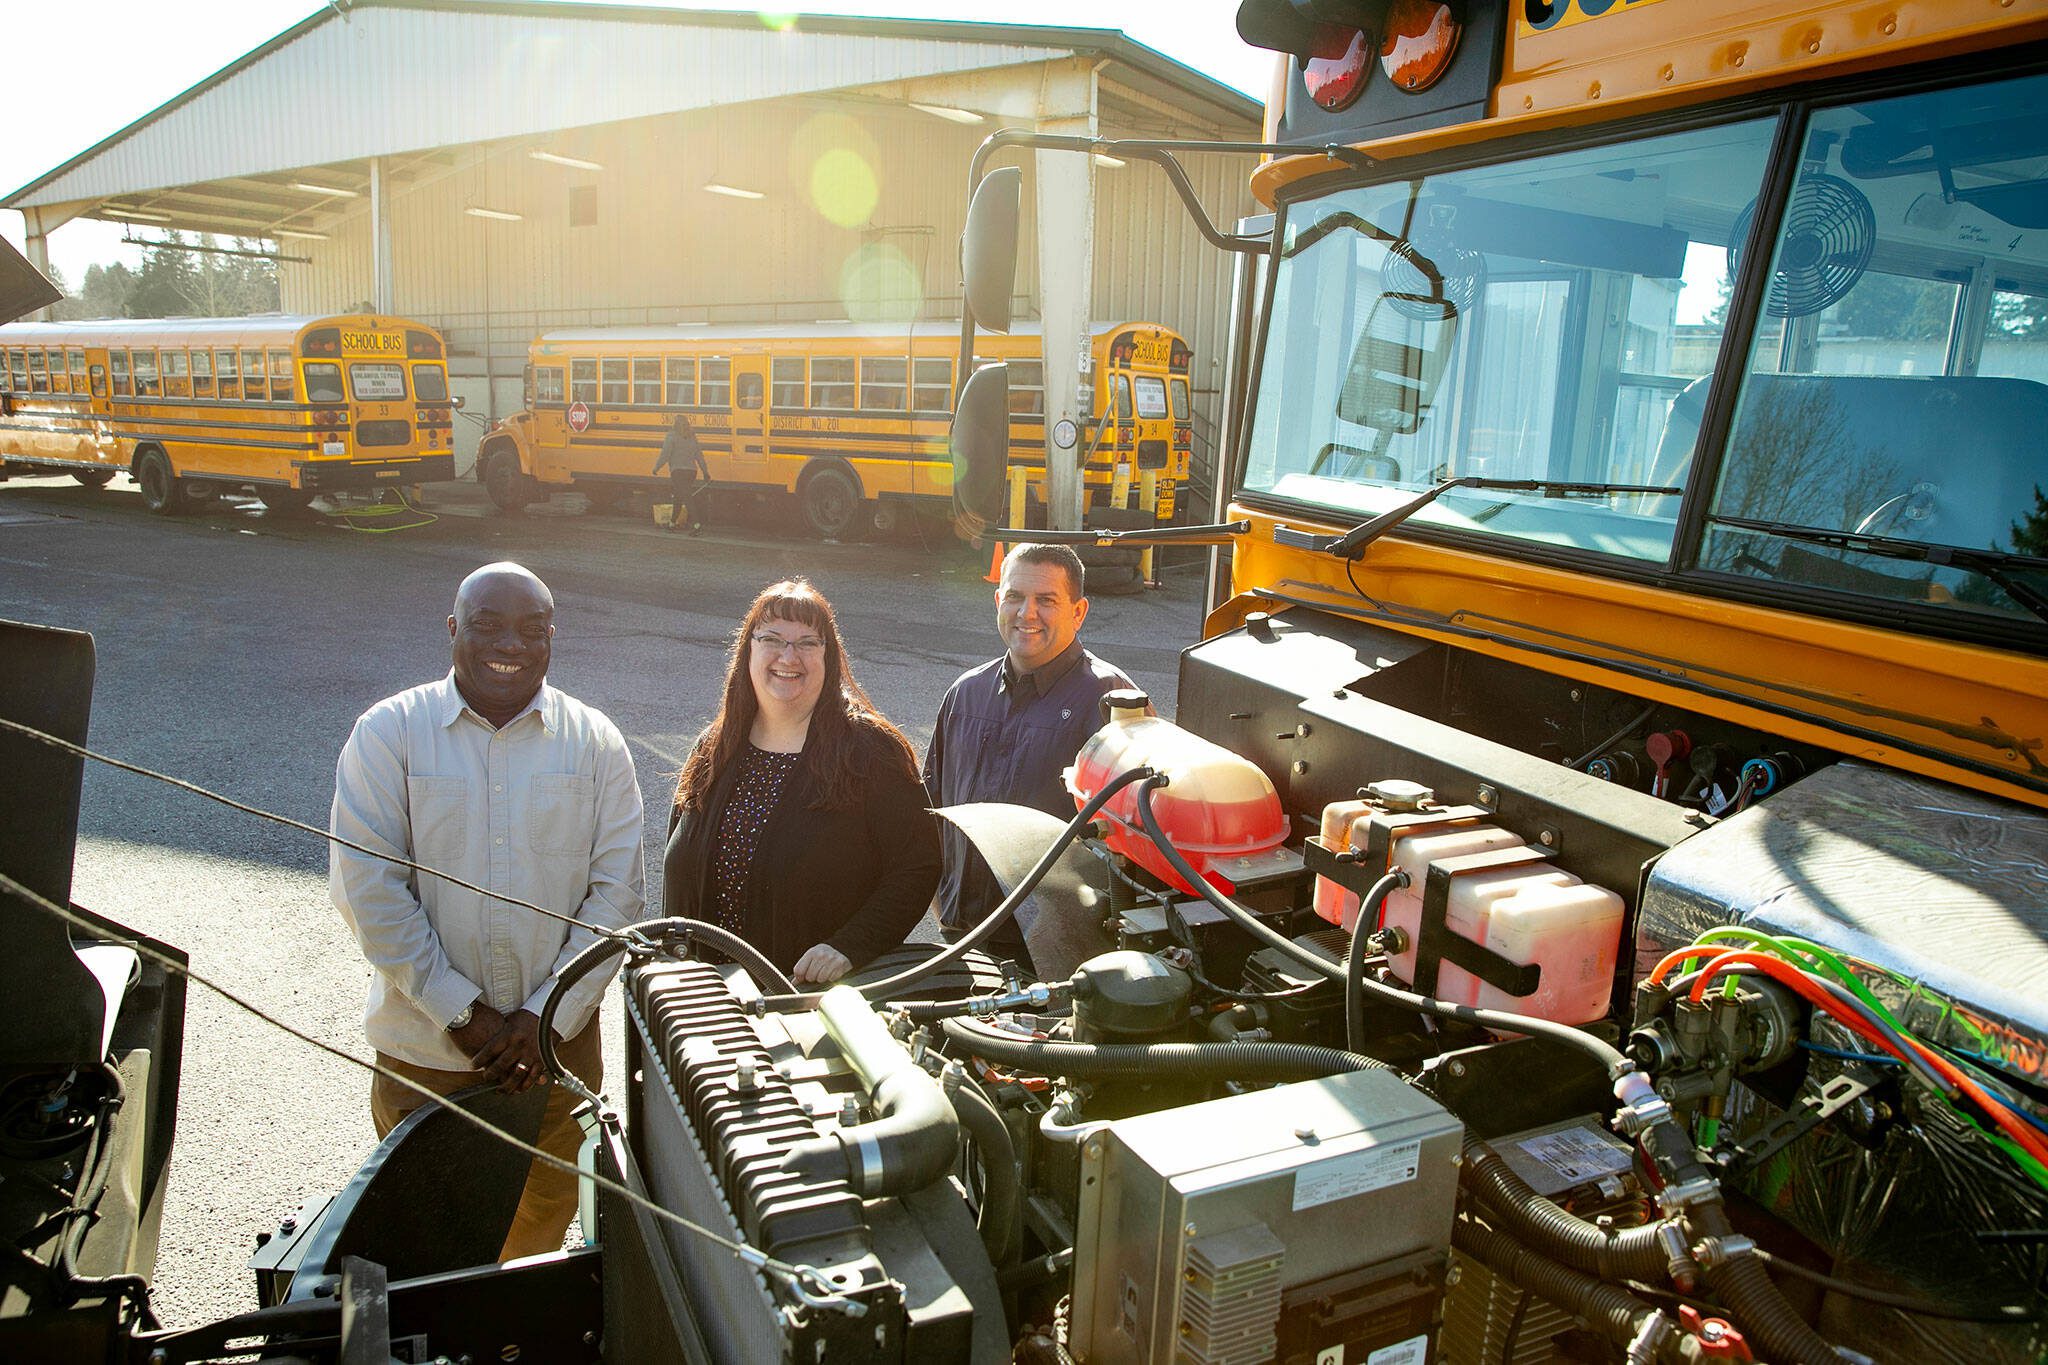 Snohomish School District transportation supervisors John Kwesele, left, and Karl Hereth, right, stand with Transportation Director Veronica Schmidt behind the open hood of the district’s first electric school bus Thursday, March 7, 2024, at the district bus depot in Snohomish, Washington. (Ryan Berry / The Herald)